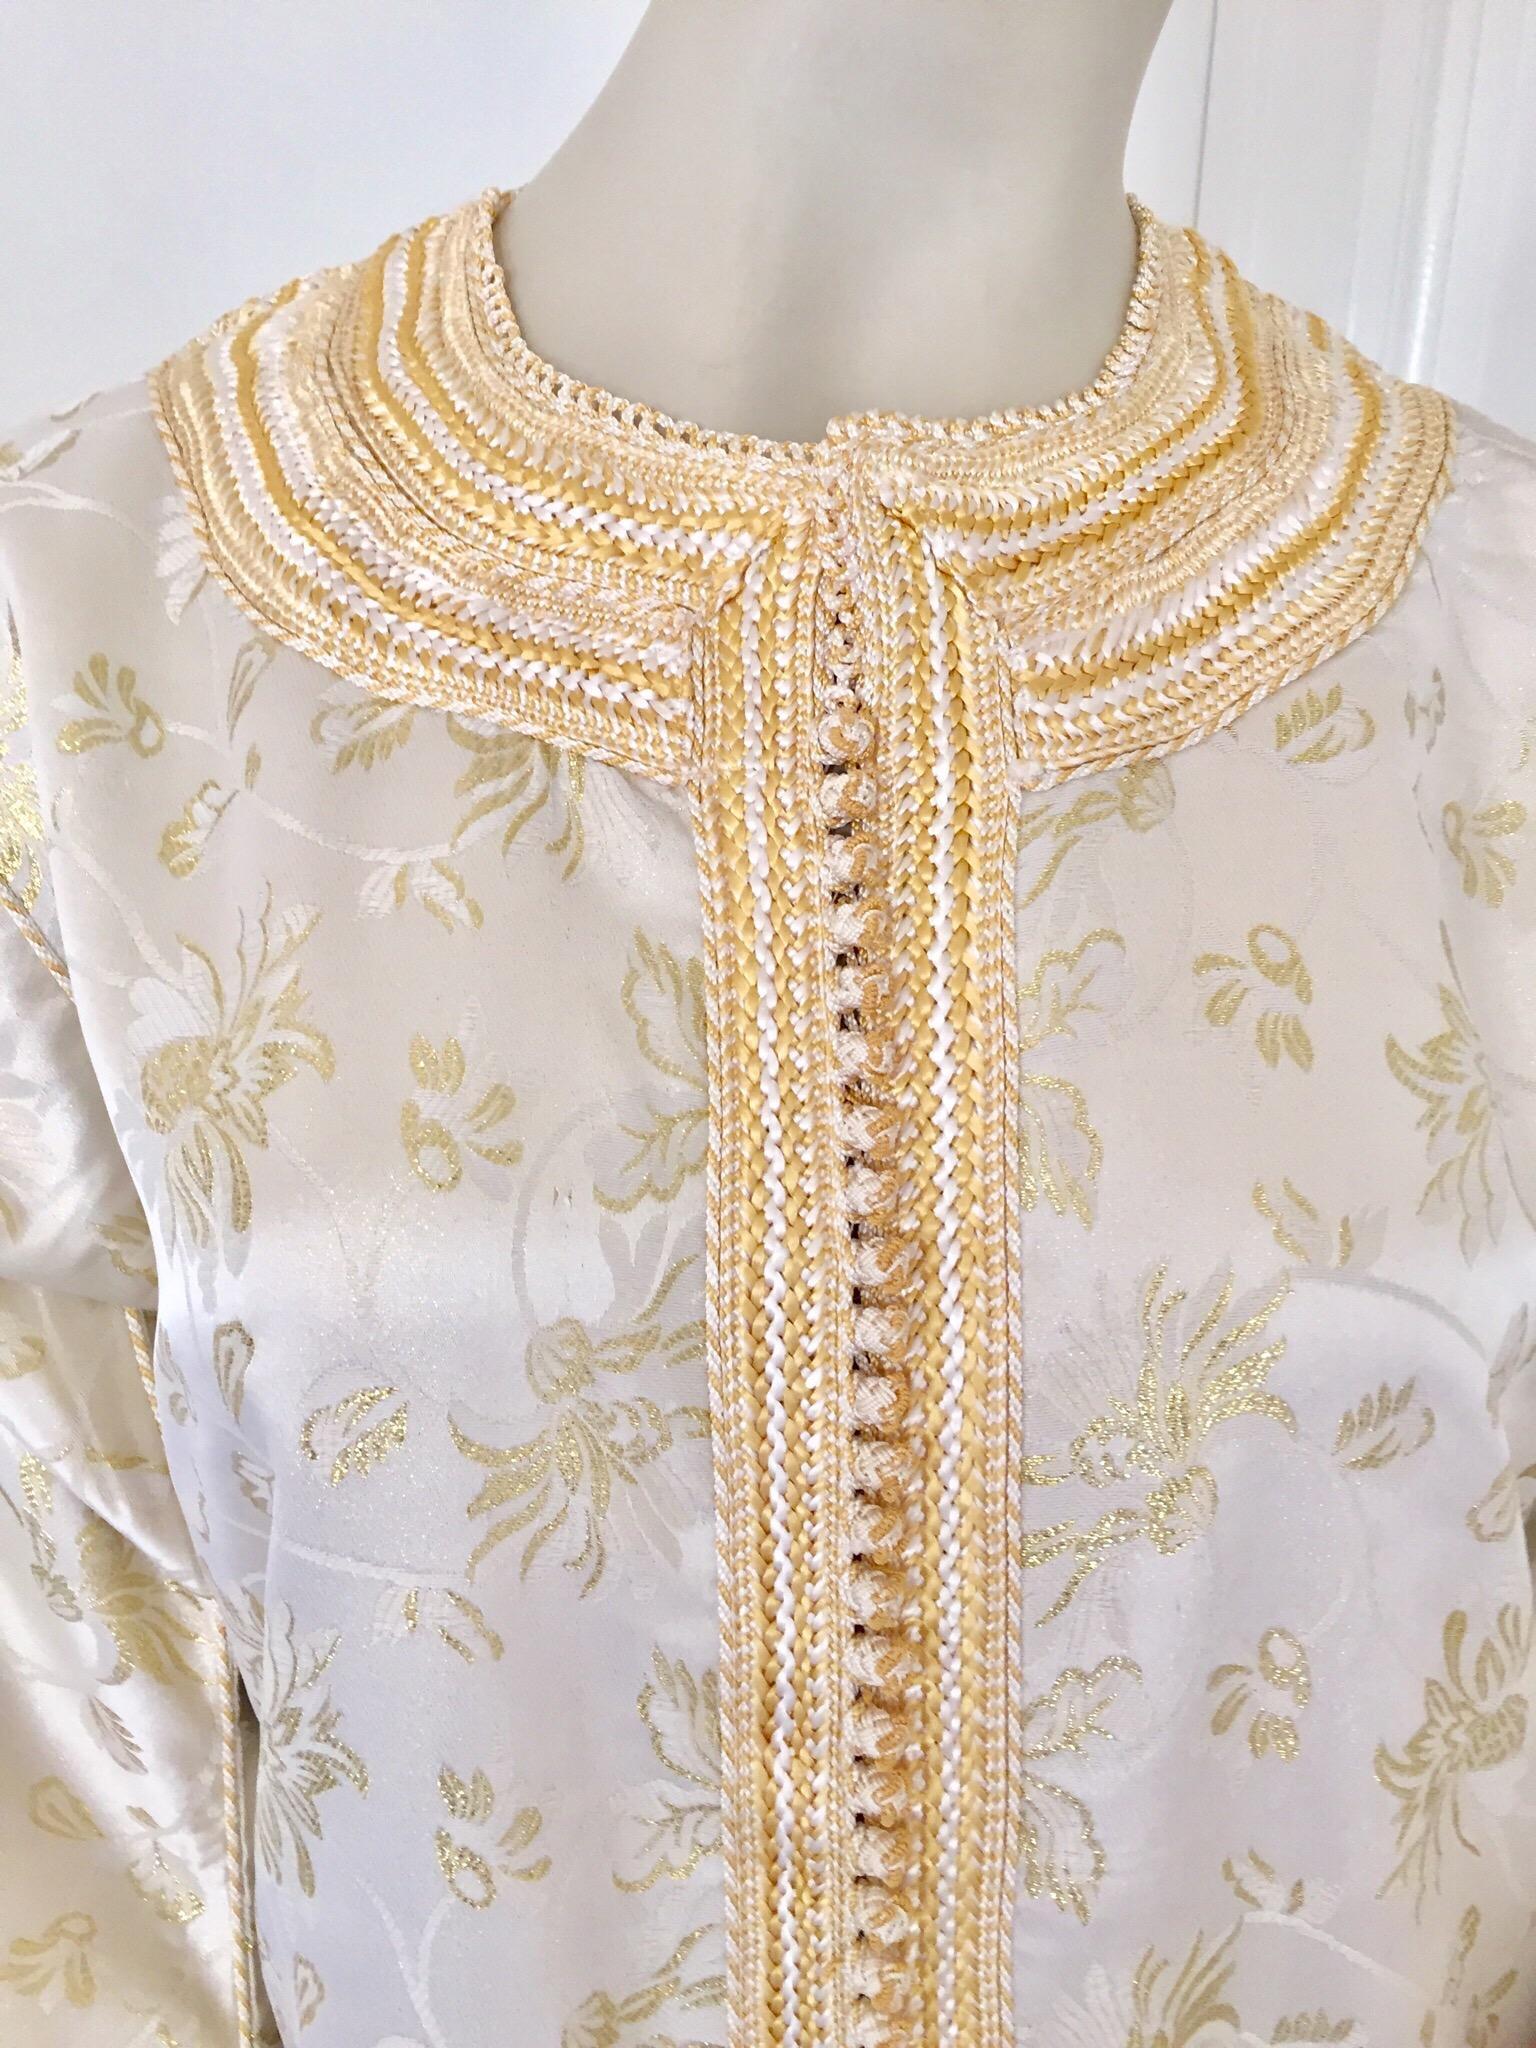 Elegant Moroccan Caftan White and Gold Metallic Floral Brocade For Sale 2